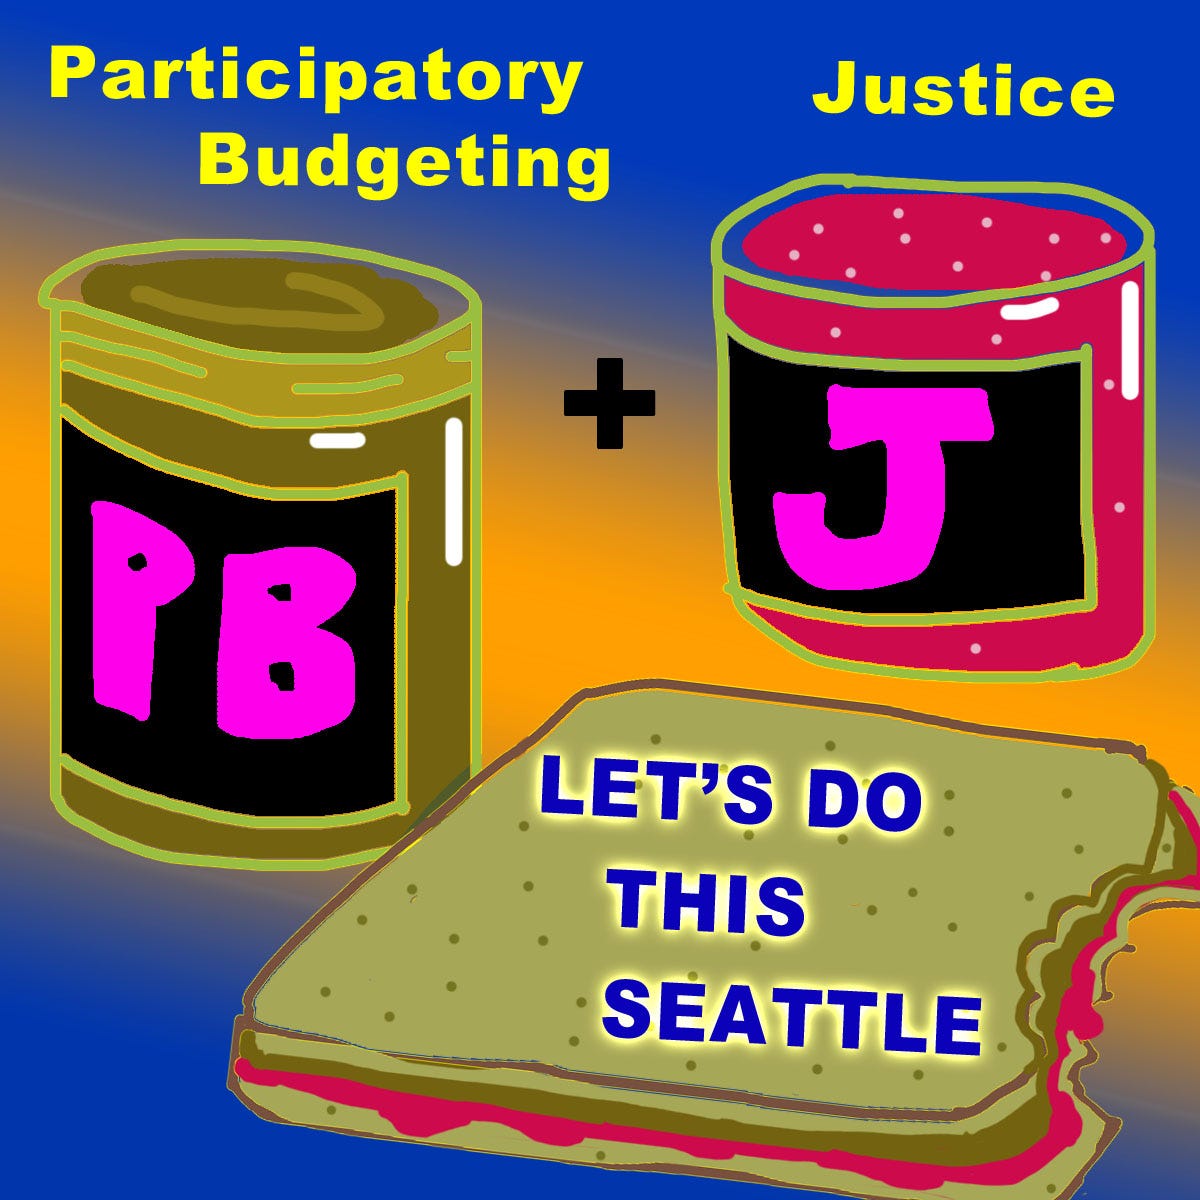 An illustration of a jar of peanut butter with the words “Participatory Budgeting”, plus a jar of jelly with the words “Justice”, sit next to a PB&J sandwich with a bite taken out of it with the words “Let’s do this Seattle”